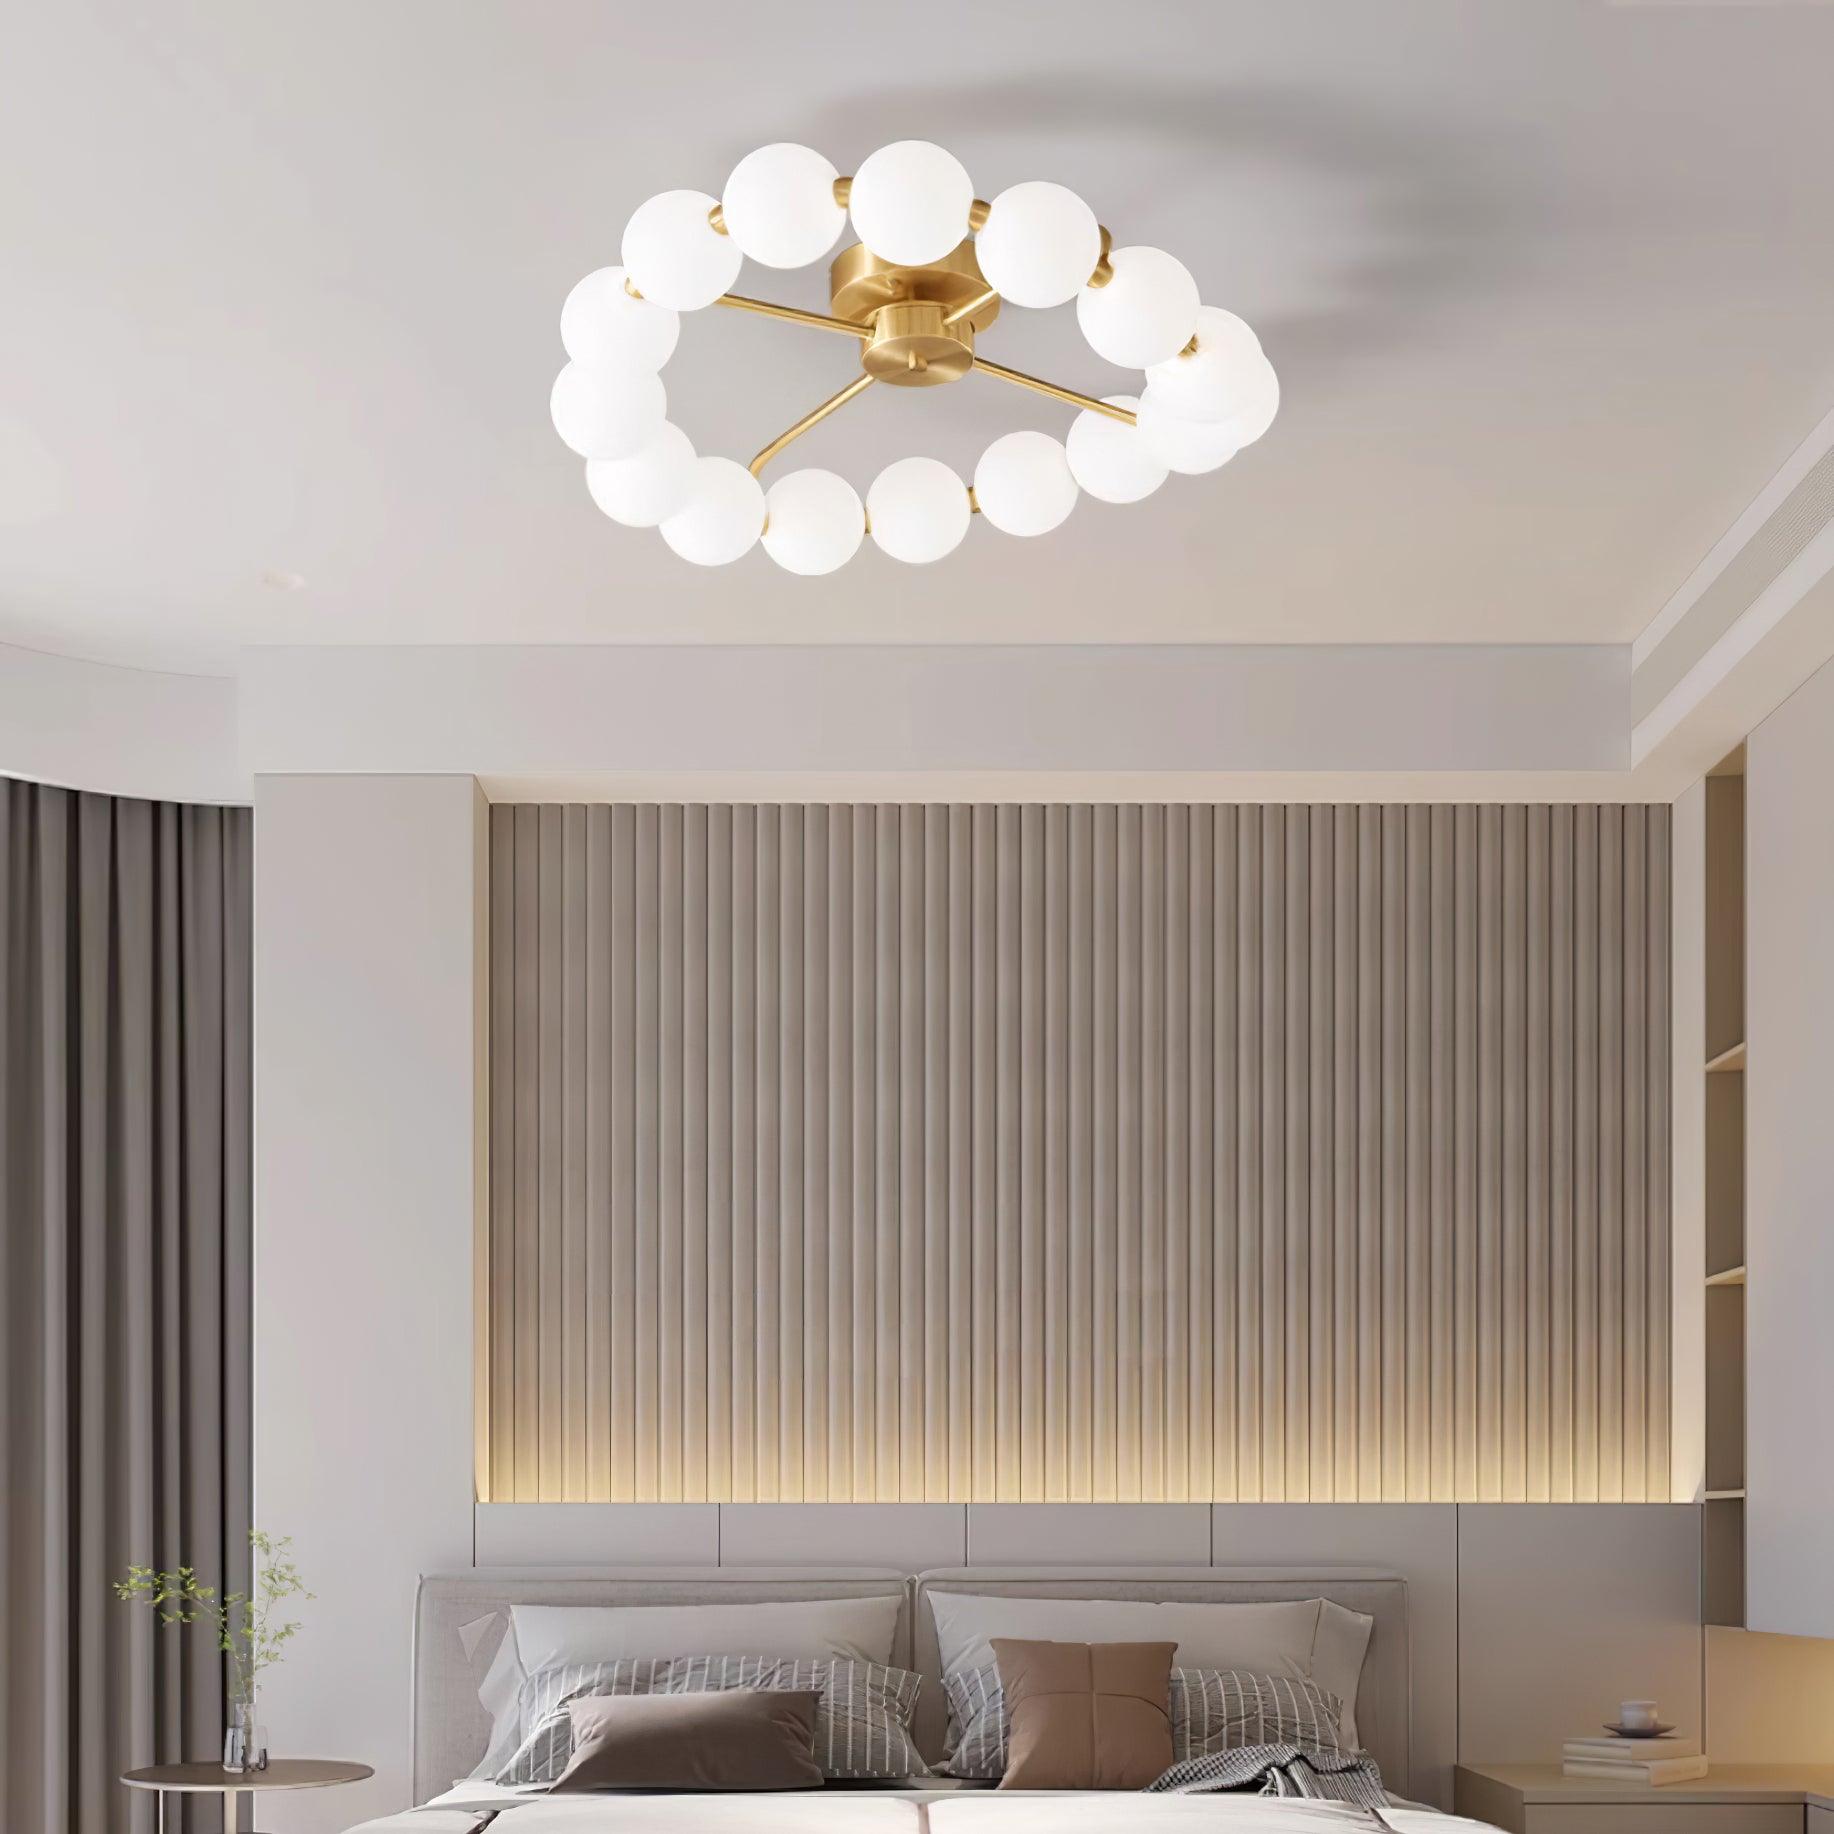 Pearls Round Ceiling Light - Docos